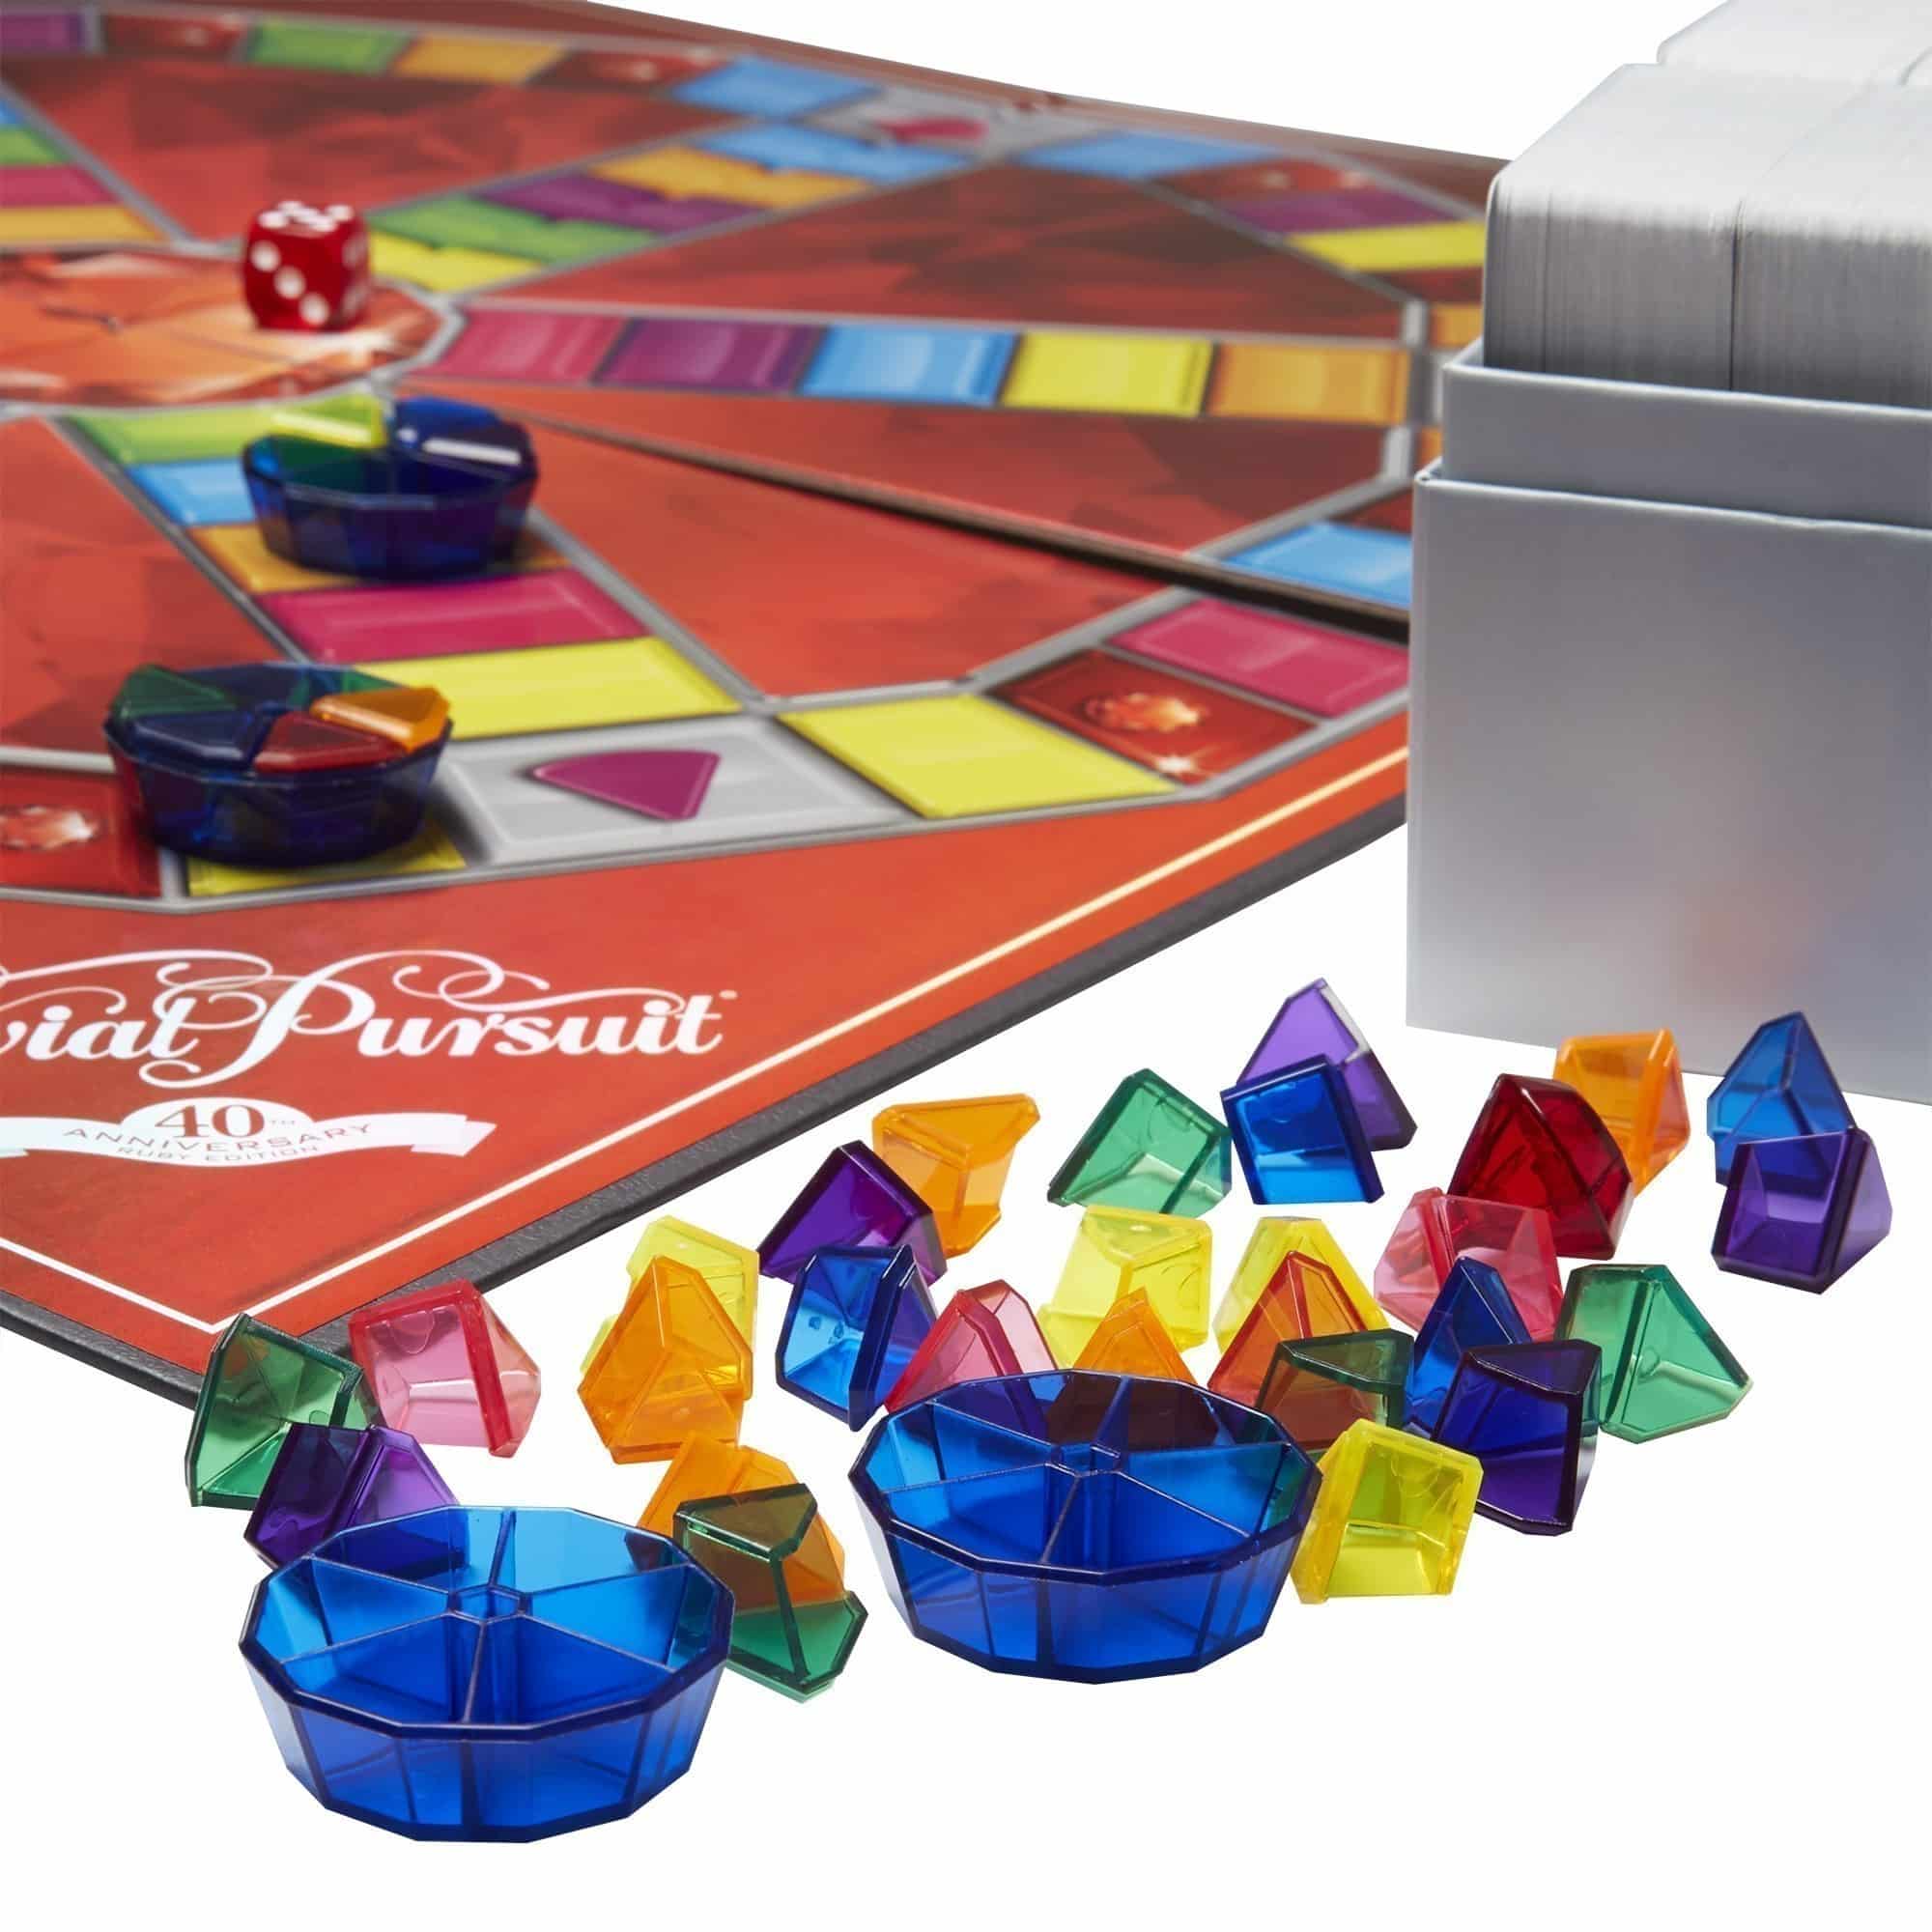 Trivial Pursuit - 40th Anniversary Ruby Edition